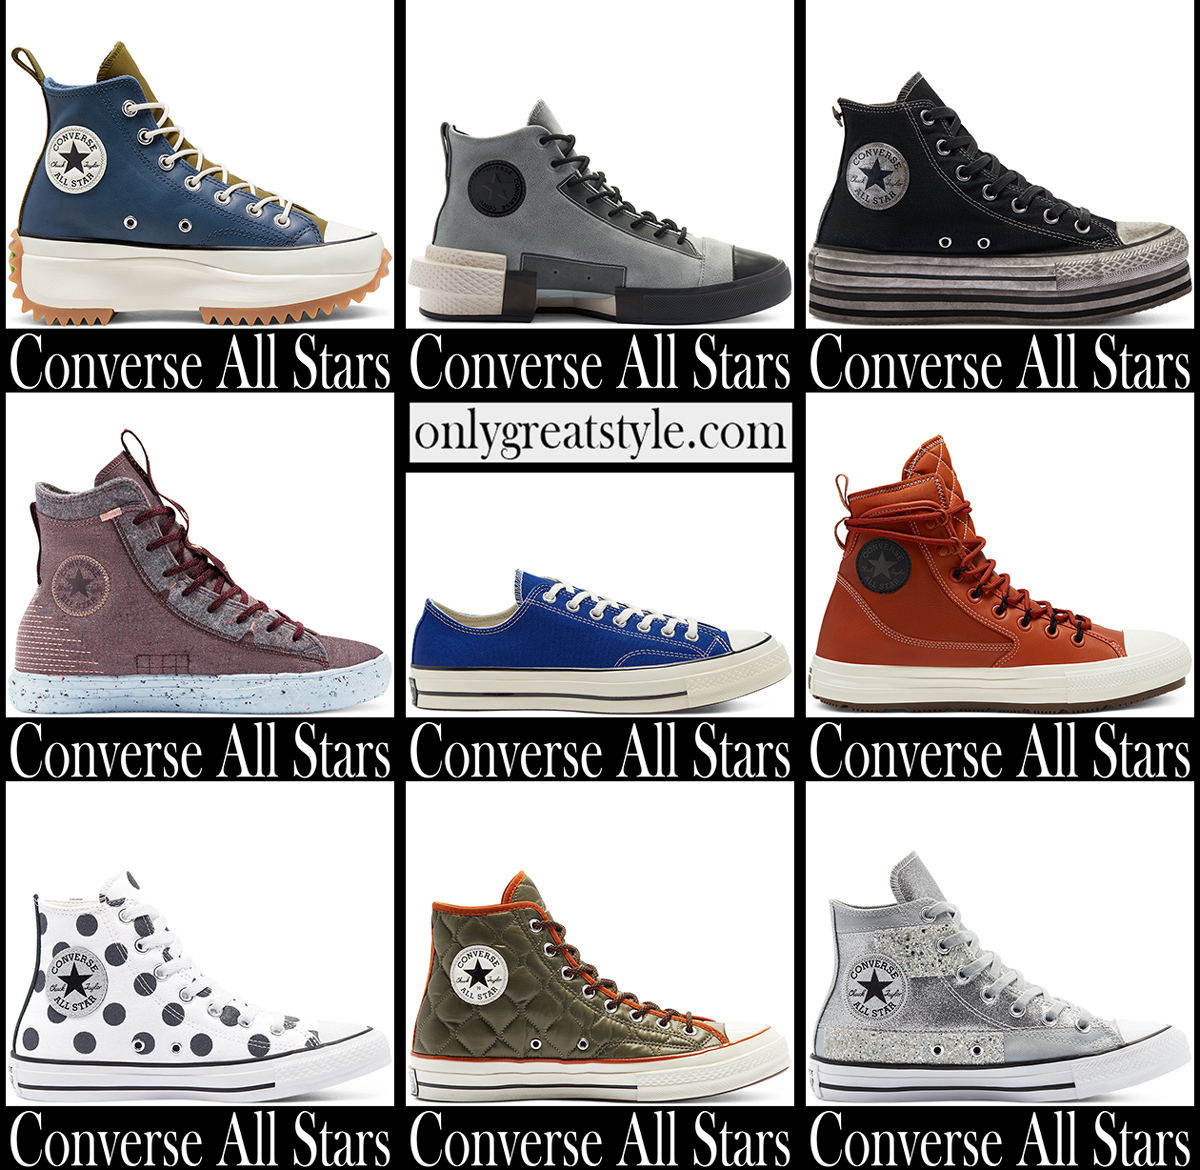 Converse sneakers 2021 new arrivals women's All Stars